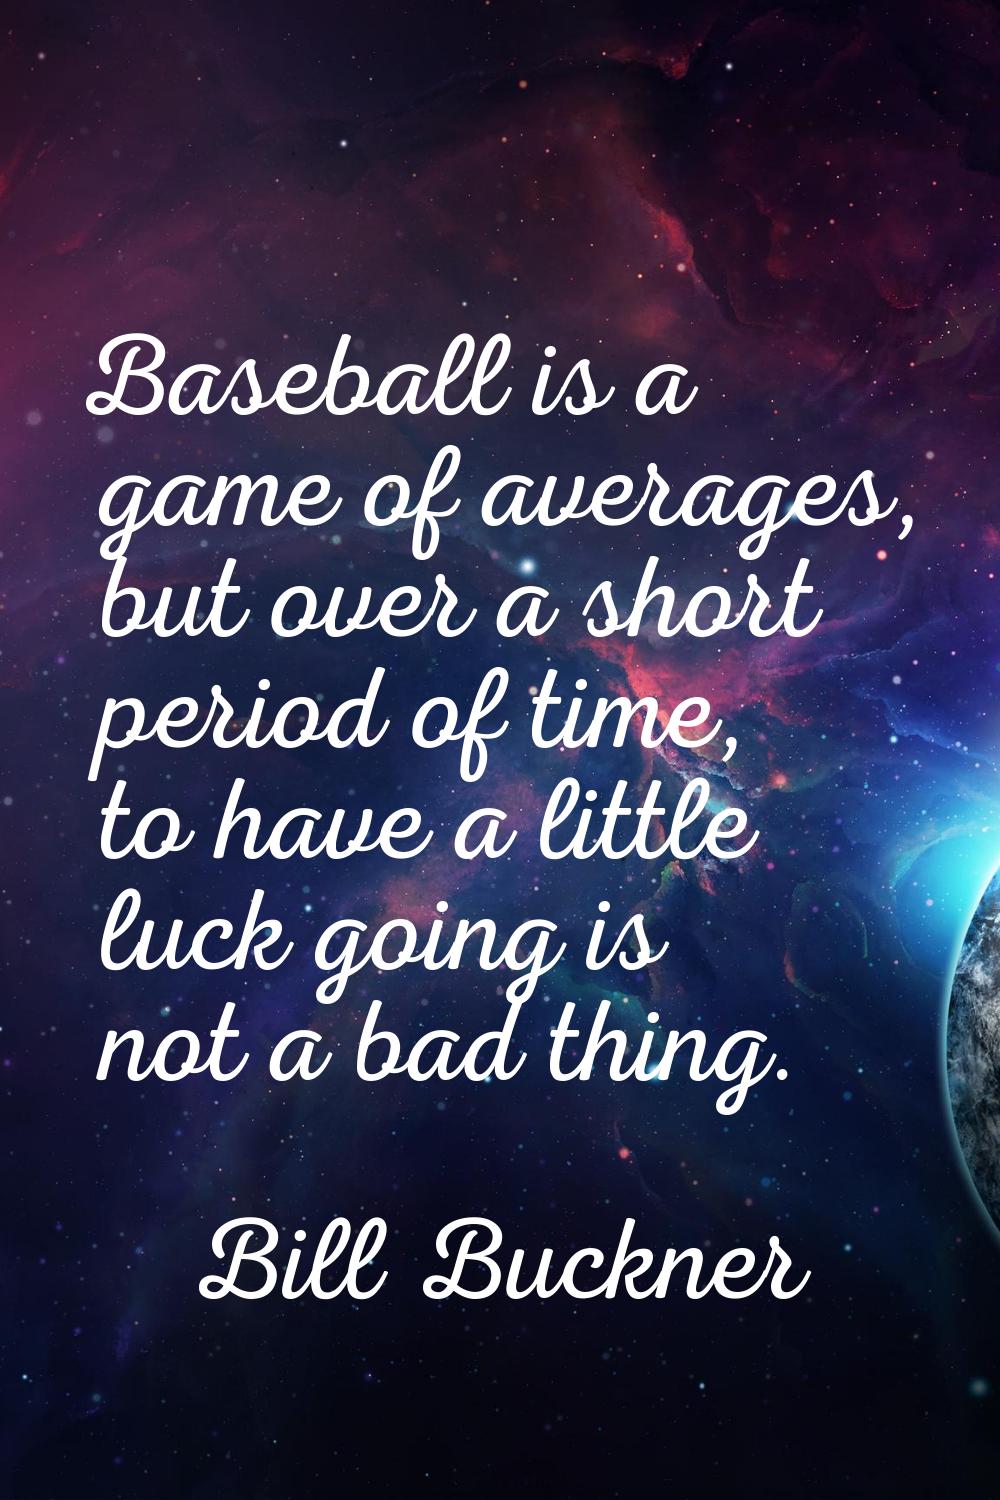 Baseball is a game of averages, but over a short period of time, to have a little luck going is not